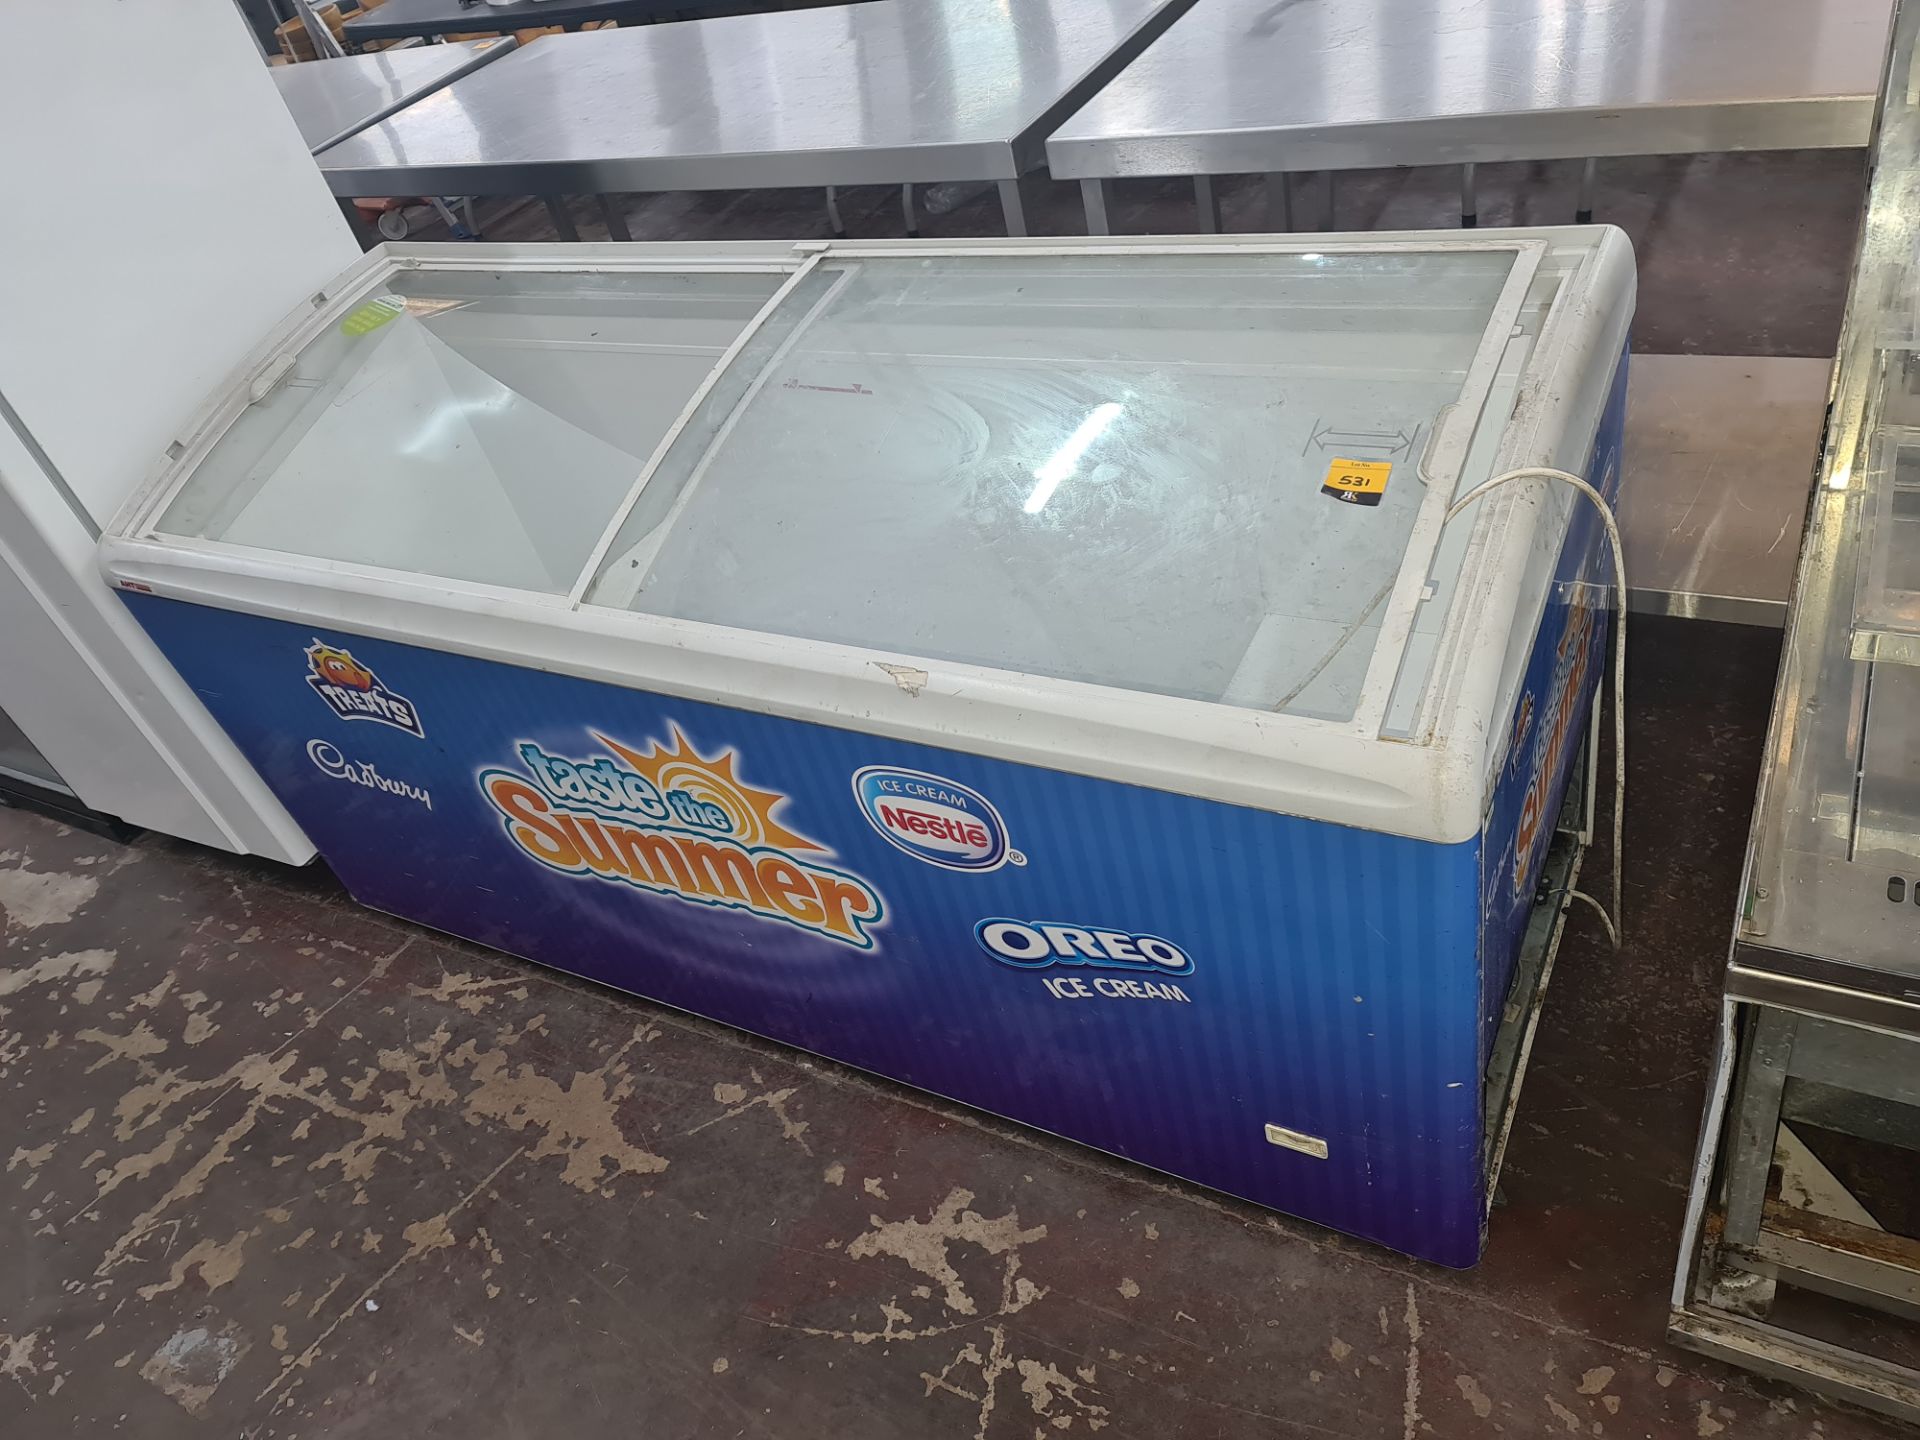 Clear topped chest freezer measuring approx. 1750mm x 650mm x 870mm